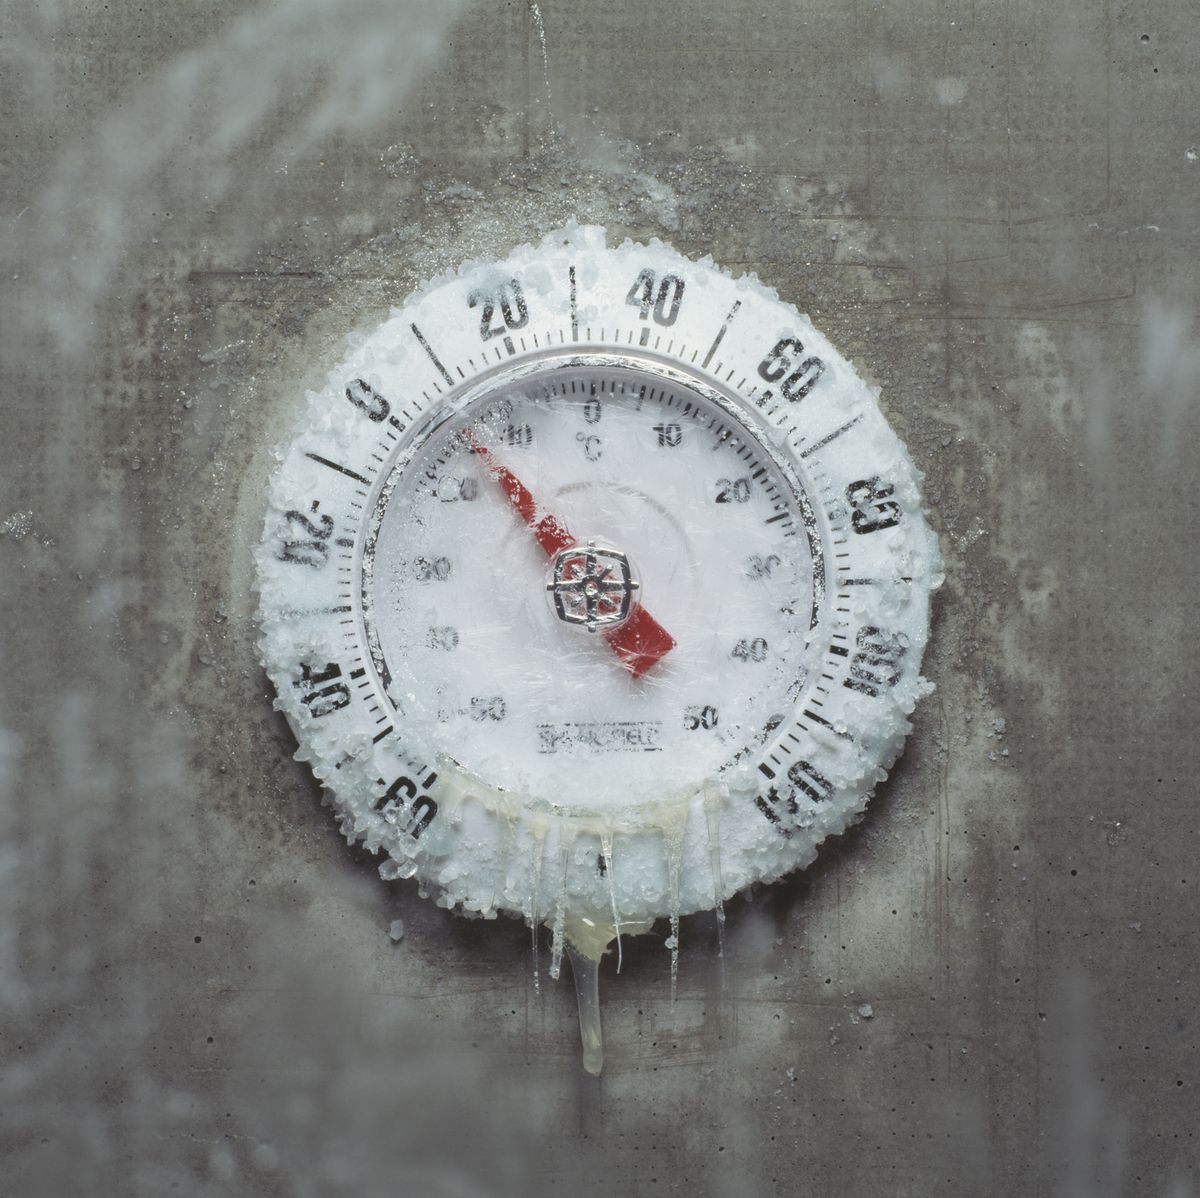 https://hips.hearstapps.com/hmg-prod/images/ice-covered-thermometer-close-up-royalty-free-image-1633372742.jpg?crop=0.819xw:1.00xh;0.0913xw,0&resize=1200:*